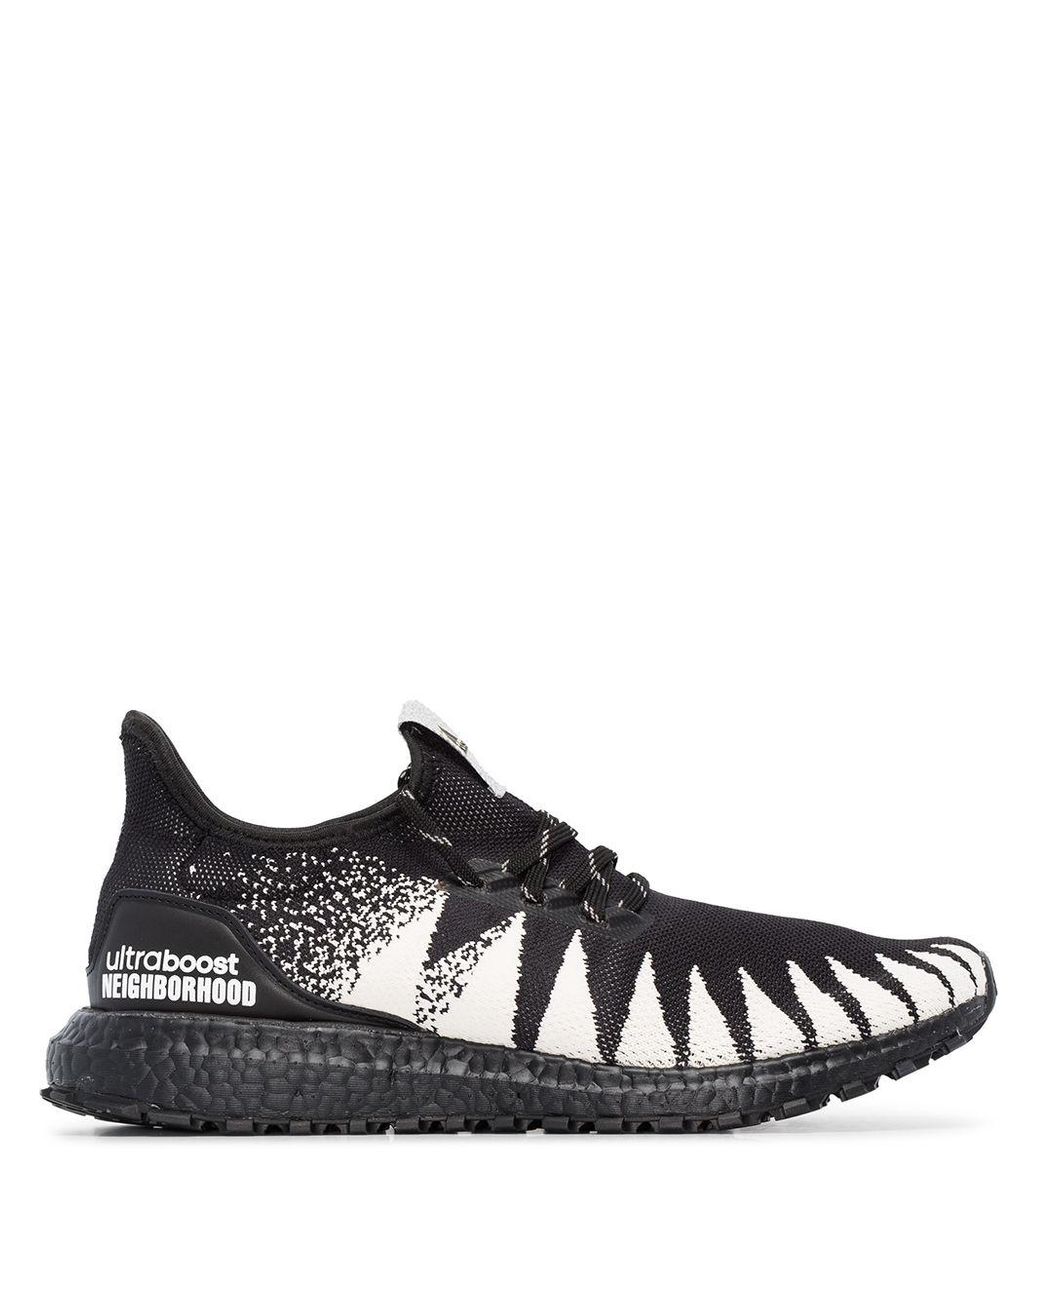 adidas Ultra Boost All Terrain 'neighborhood' Shoes in Black for Men - Save  25% | Lyst